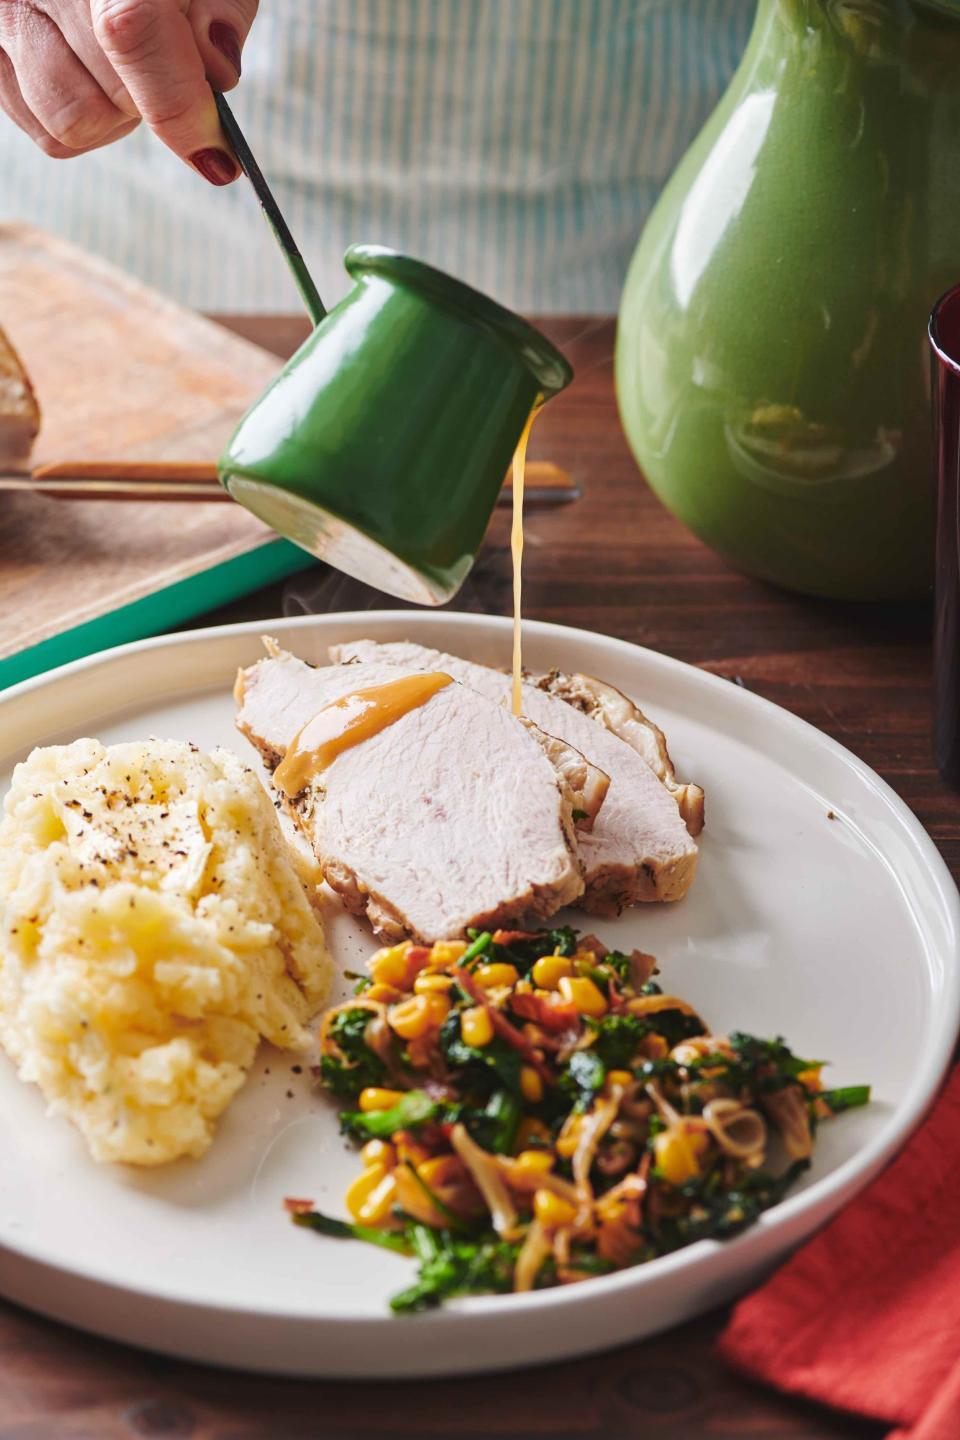 In this May 2019 photo gravy is poured on a plate of turkey, mash potatoes and gravy and a side of sauteed broccoli rabe, corn and onions with crispy bacon, on a table in New York. If you remember that the turkey breast will take less time to cook than the legs, and that you can get a head start on your gravy, Thanksgiving will be a whole lot less stressful. (Cheyenne Cohen/Katie Workman via AP)